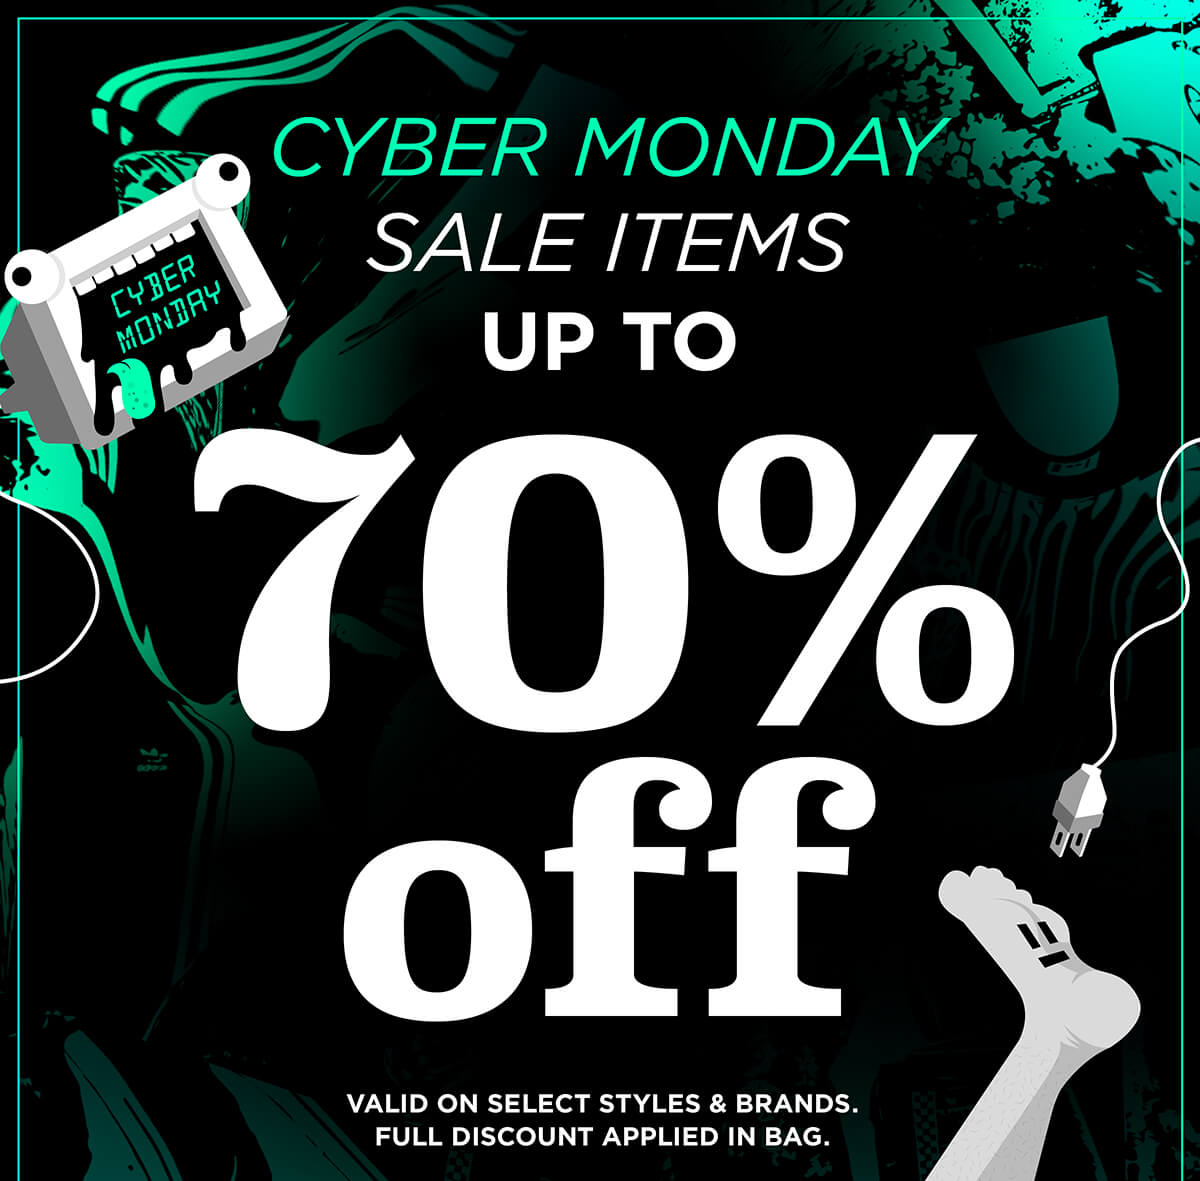 UP TO 70% OFF - HUNDREDS OF ITEMS ADDED FOR CYBER MONDAY